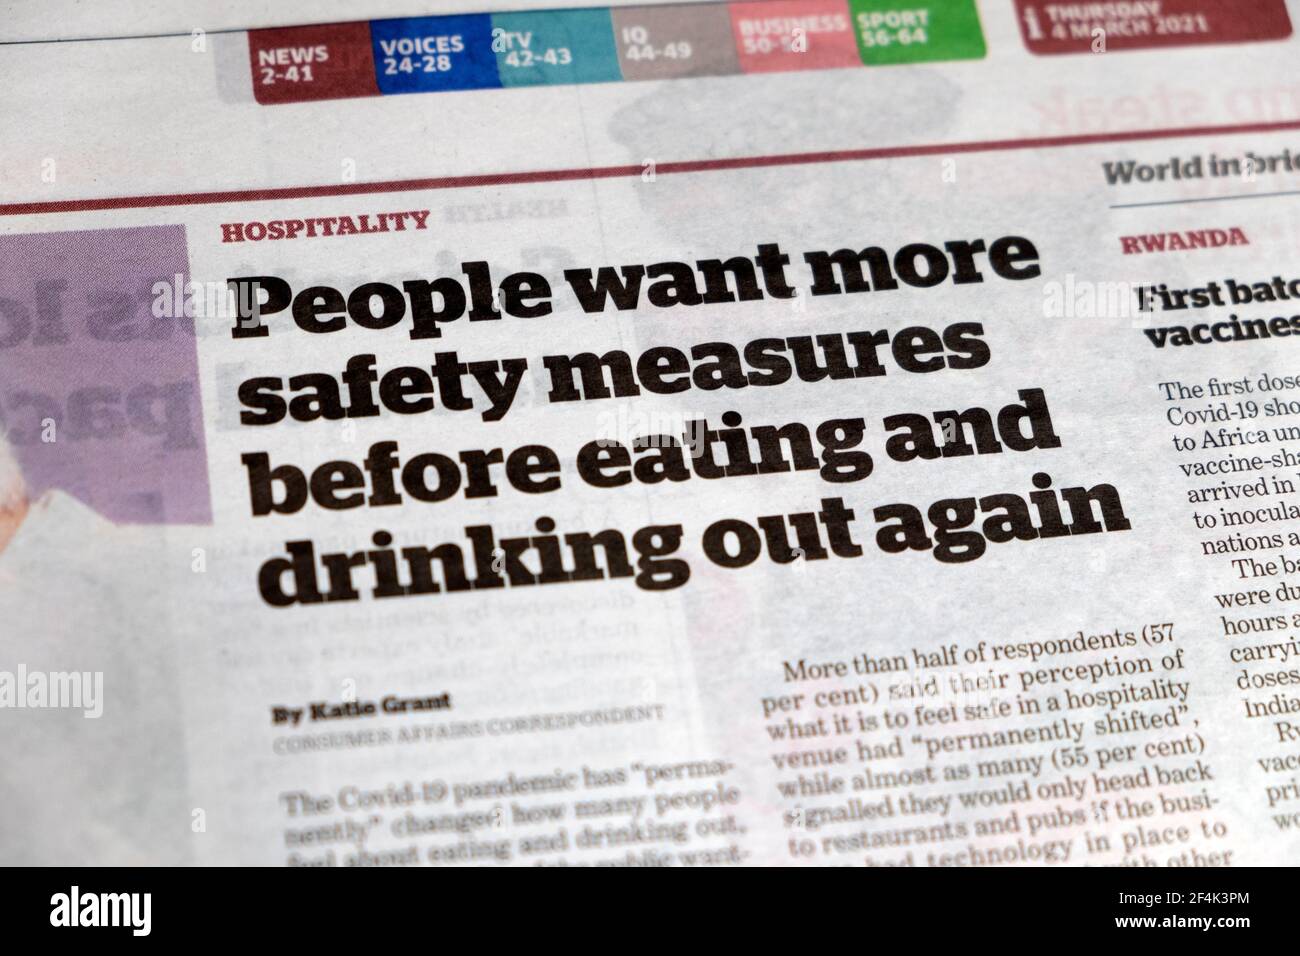 Hospitality news 'People want more safety measures before eating and drinking out again' i newspaper headline article on 3 March 2021 London UK Stock Photo